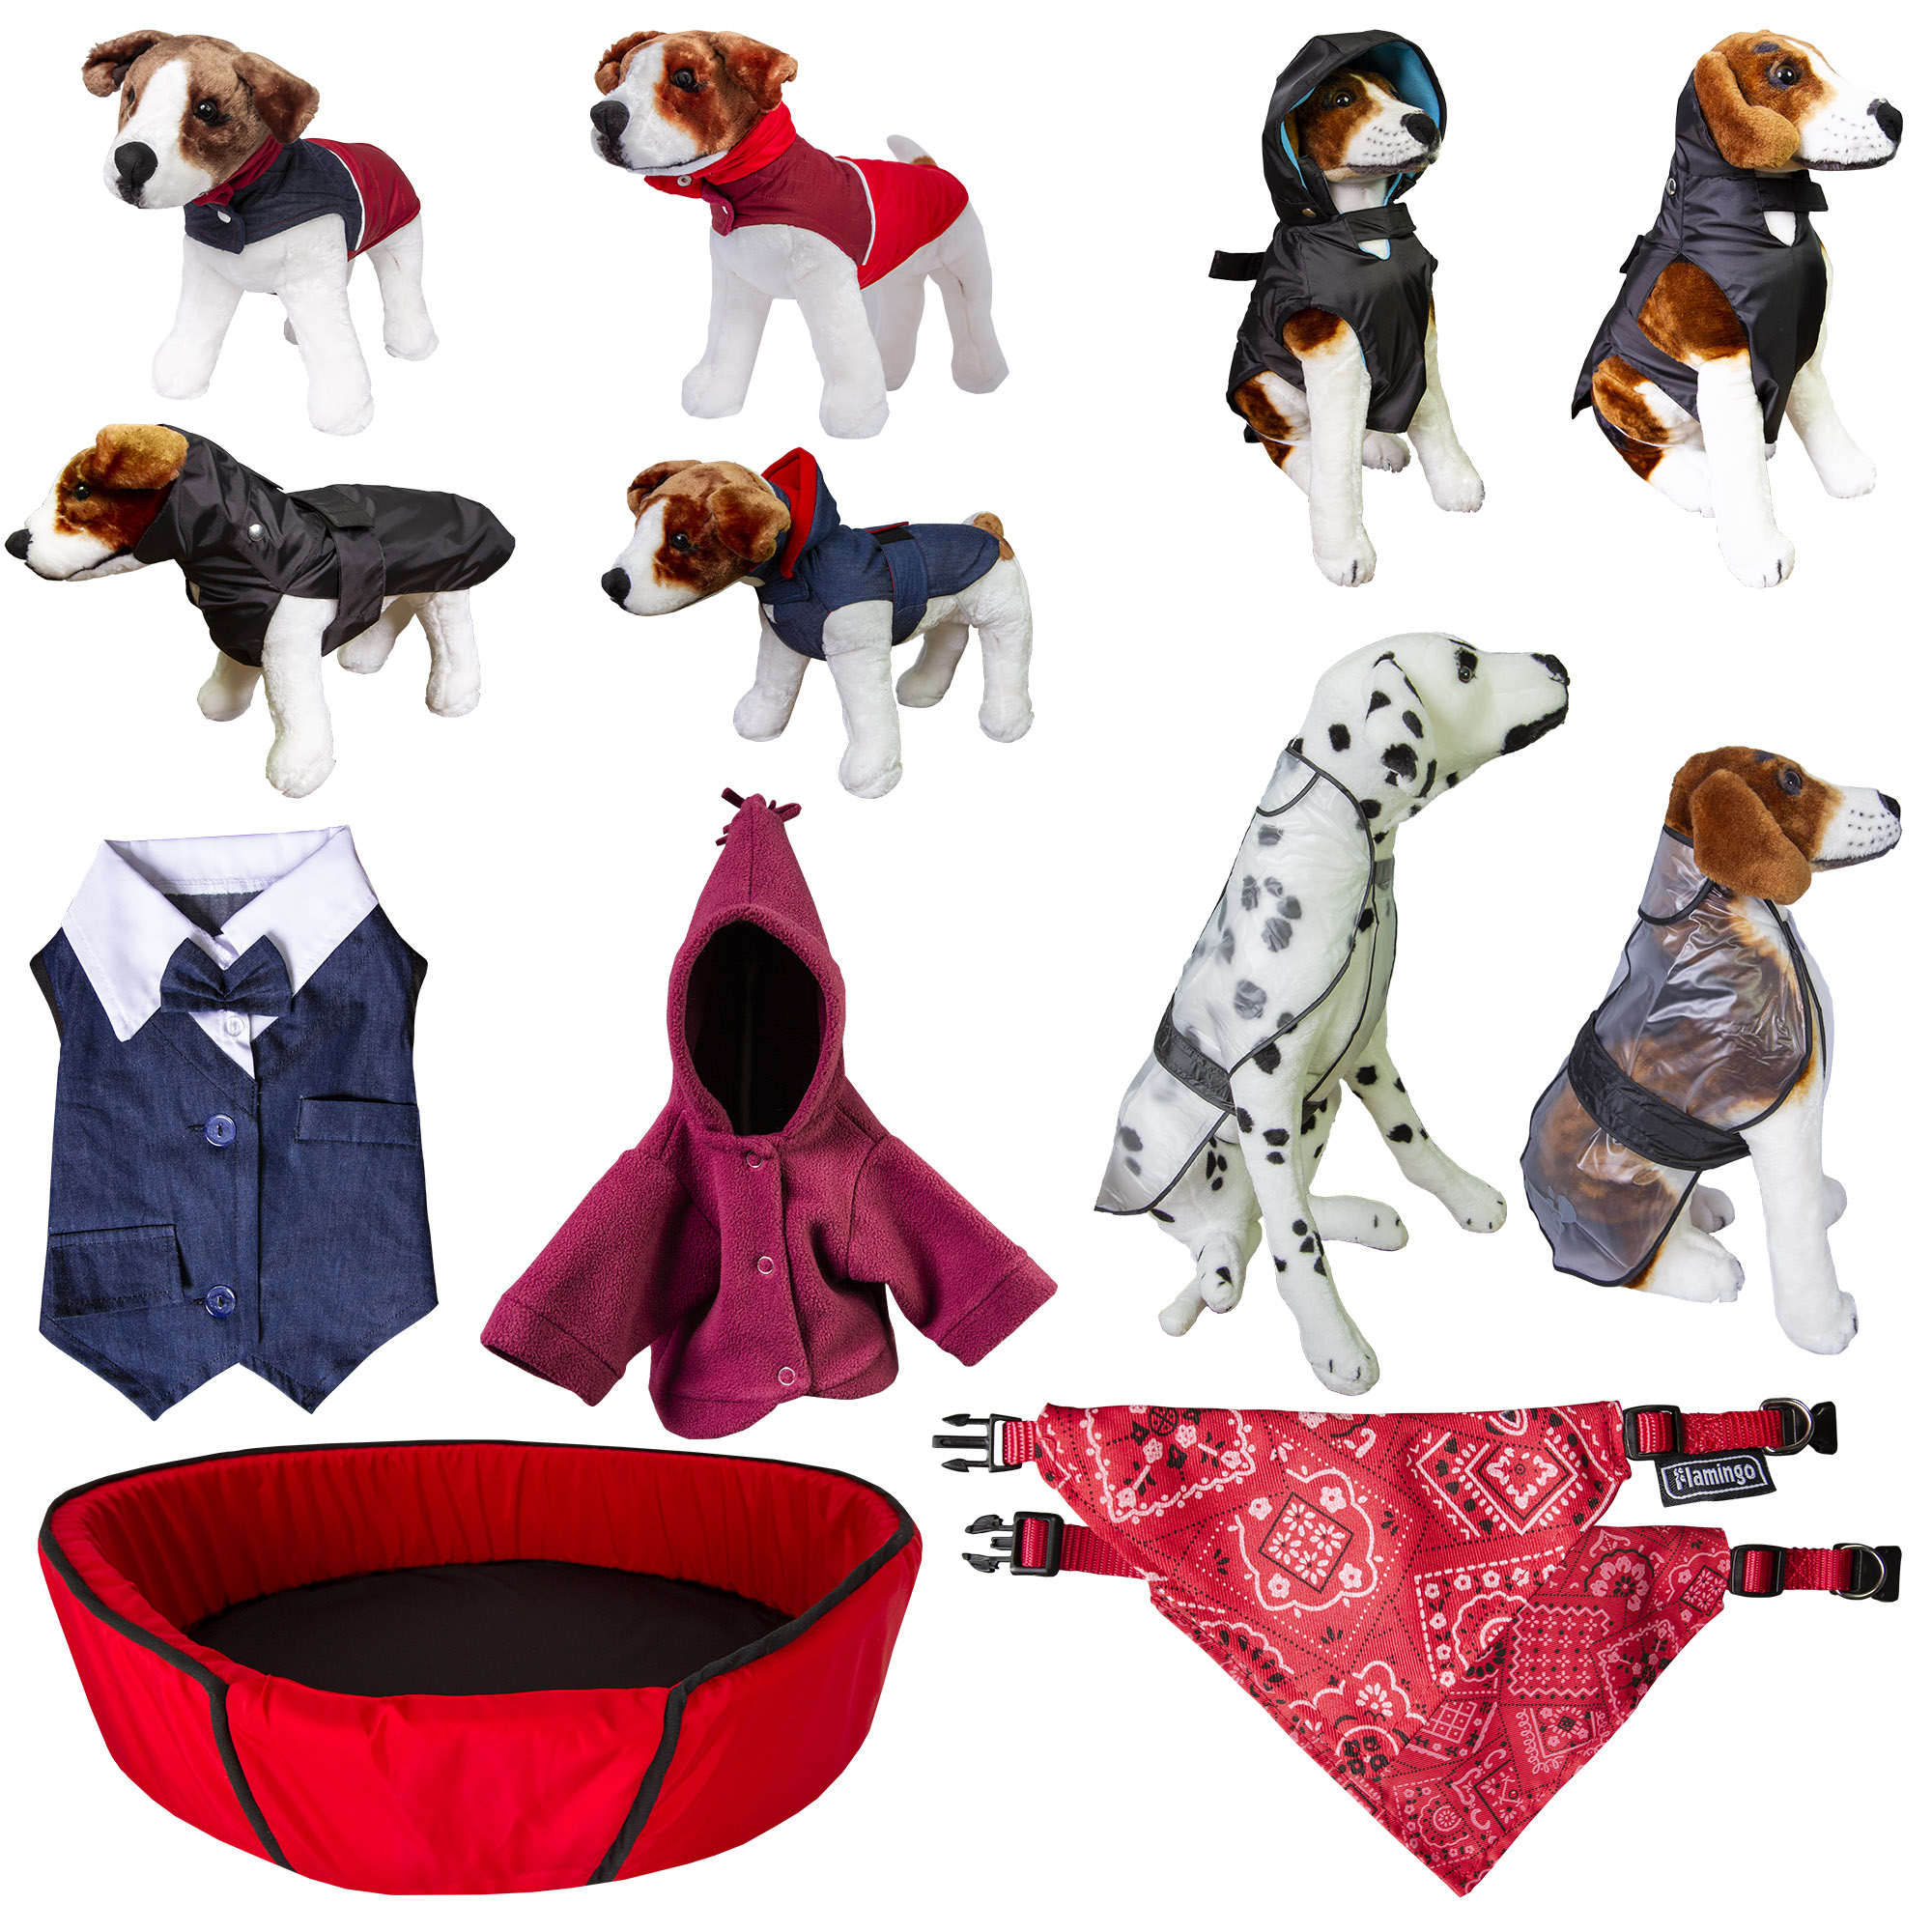 Default Category International/Veterinary/PETS CLOTHING & ACCESSORIES